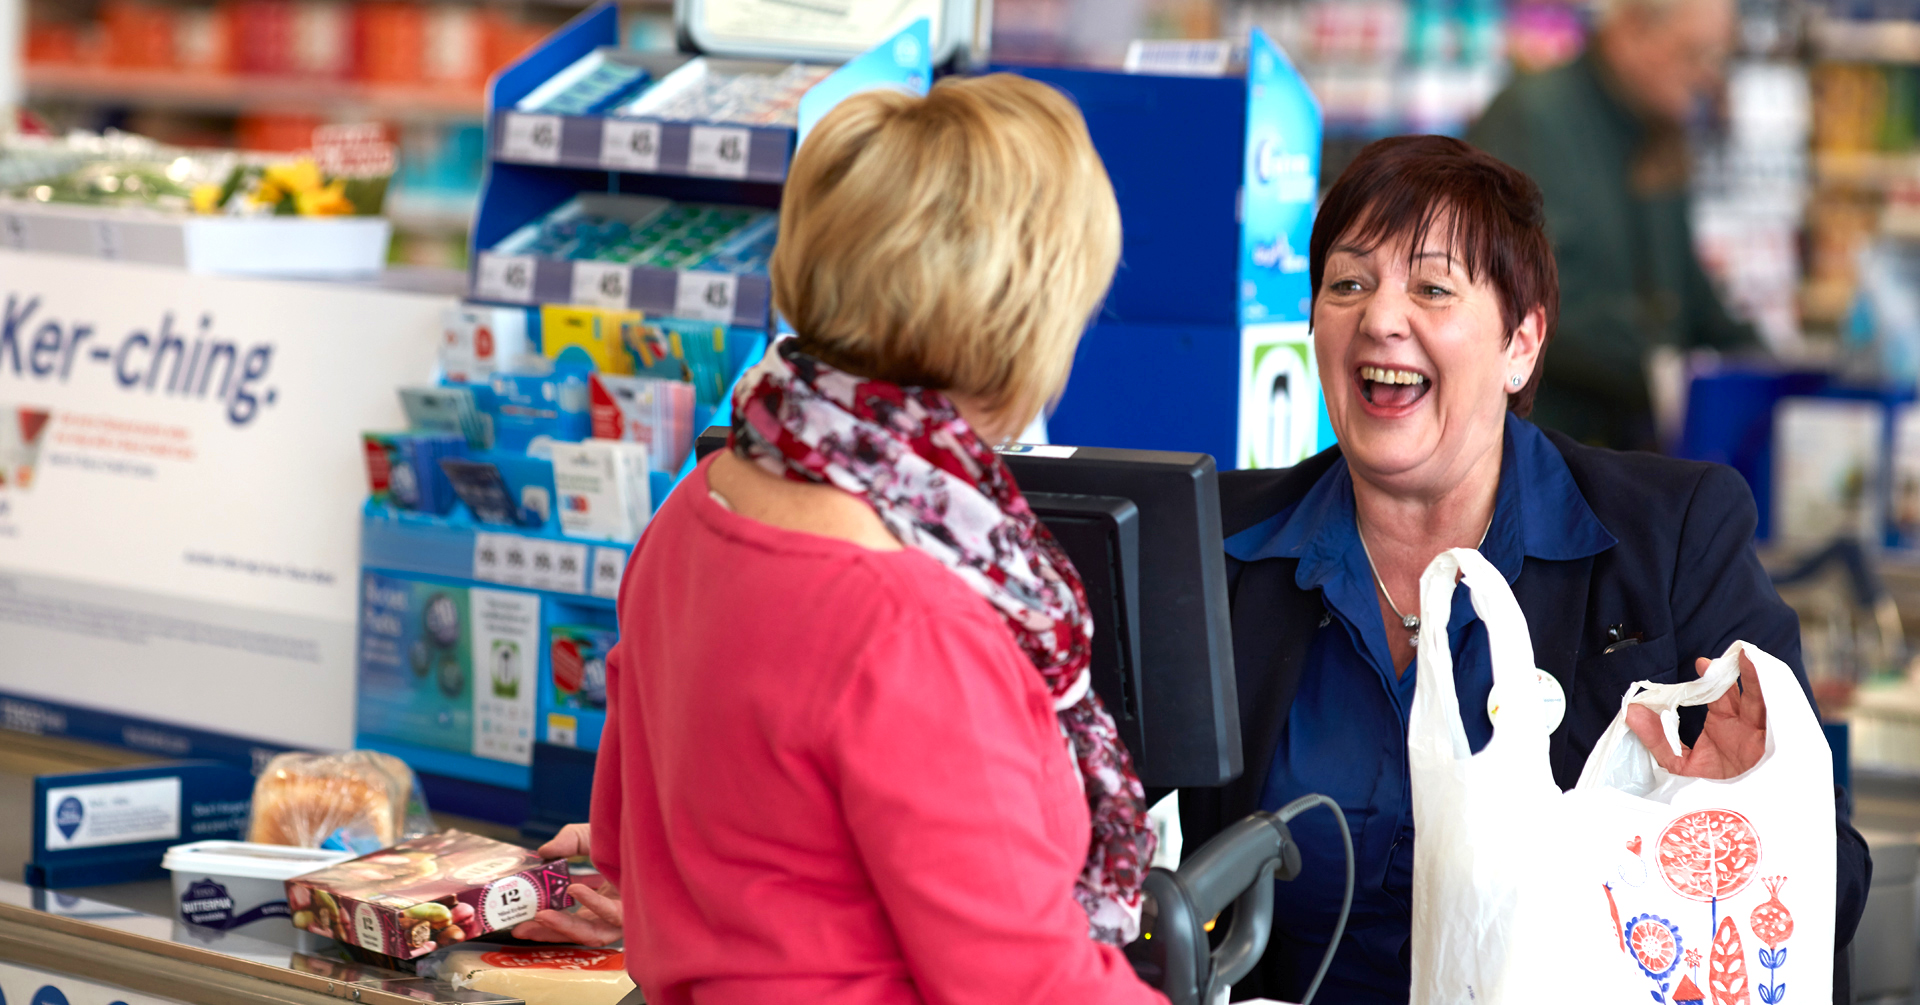 Colleague at the checkout chatting with customer and smiling